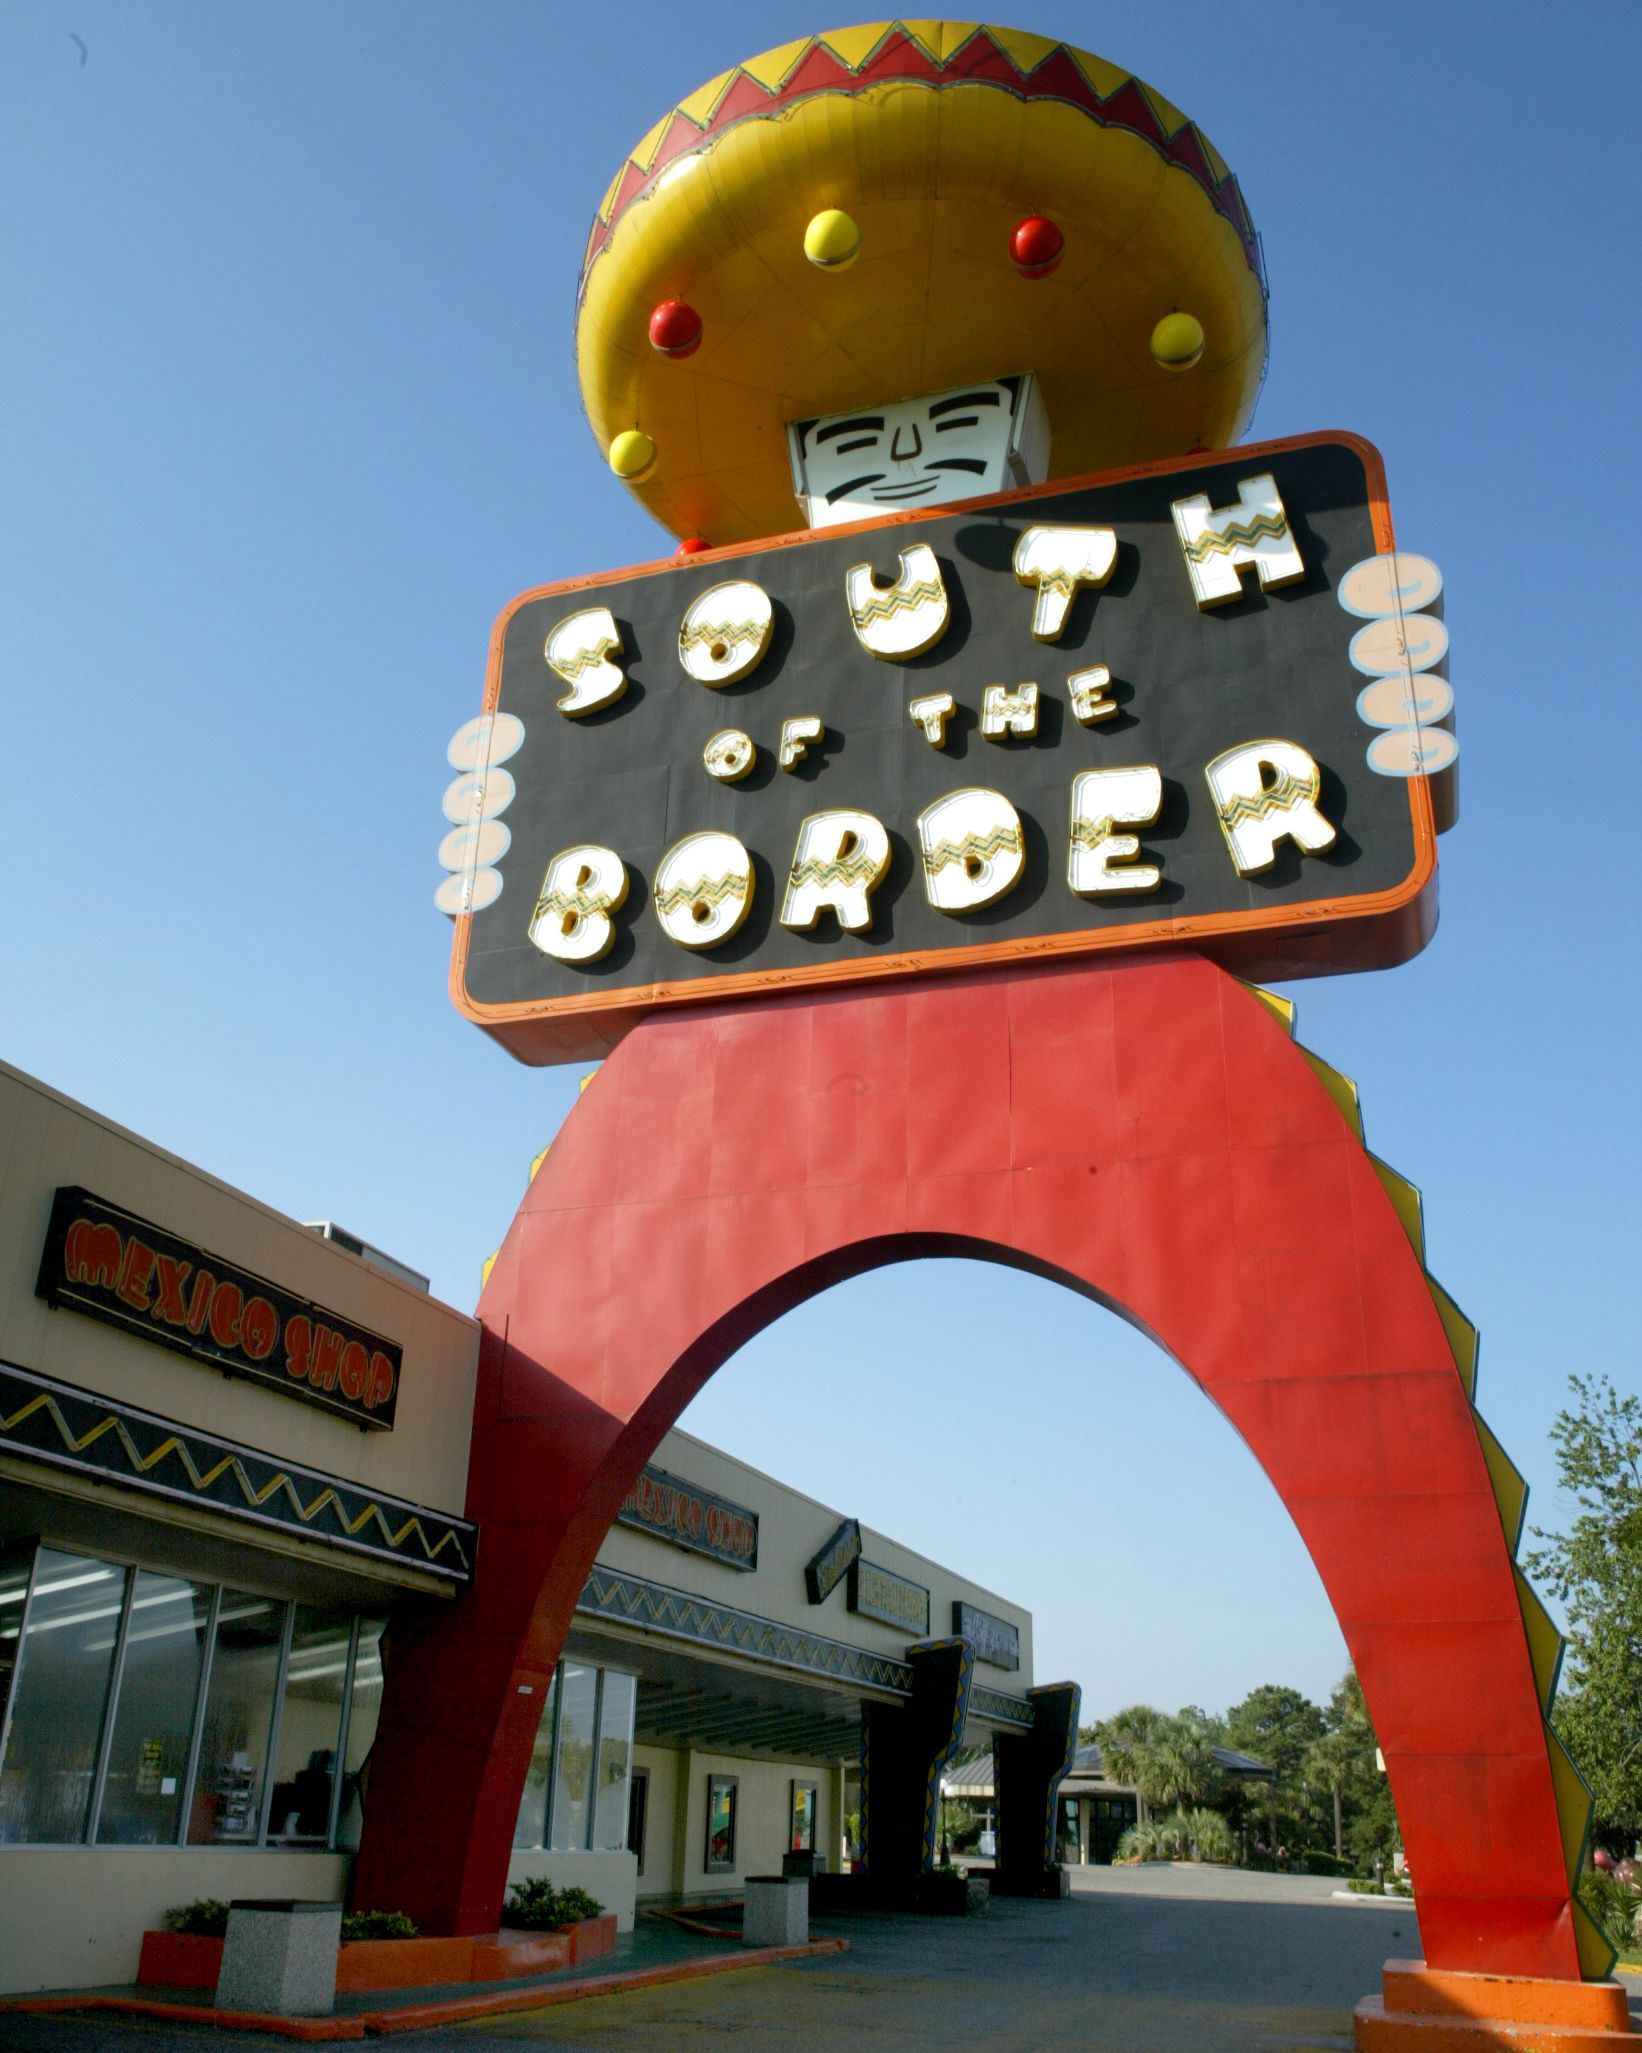 <p><strong>Where:</strong> Hamer, South Carolina <br><strong>Miles from highway:</strong> < 1 <br>One of the most iconic sights off I-95, this attraction is famous for its giant roadside statue of a man wearing a sombrero. Operating for more than 50 years, the kitschy rest stop includes restaurants, a motel, a video arcade, and mini golf.</p>